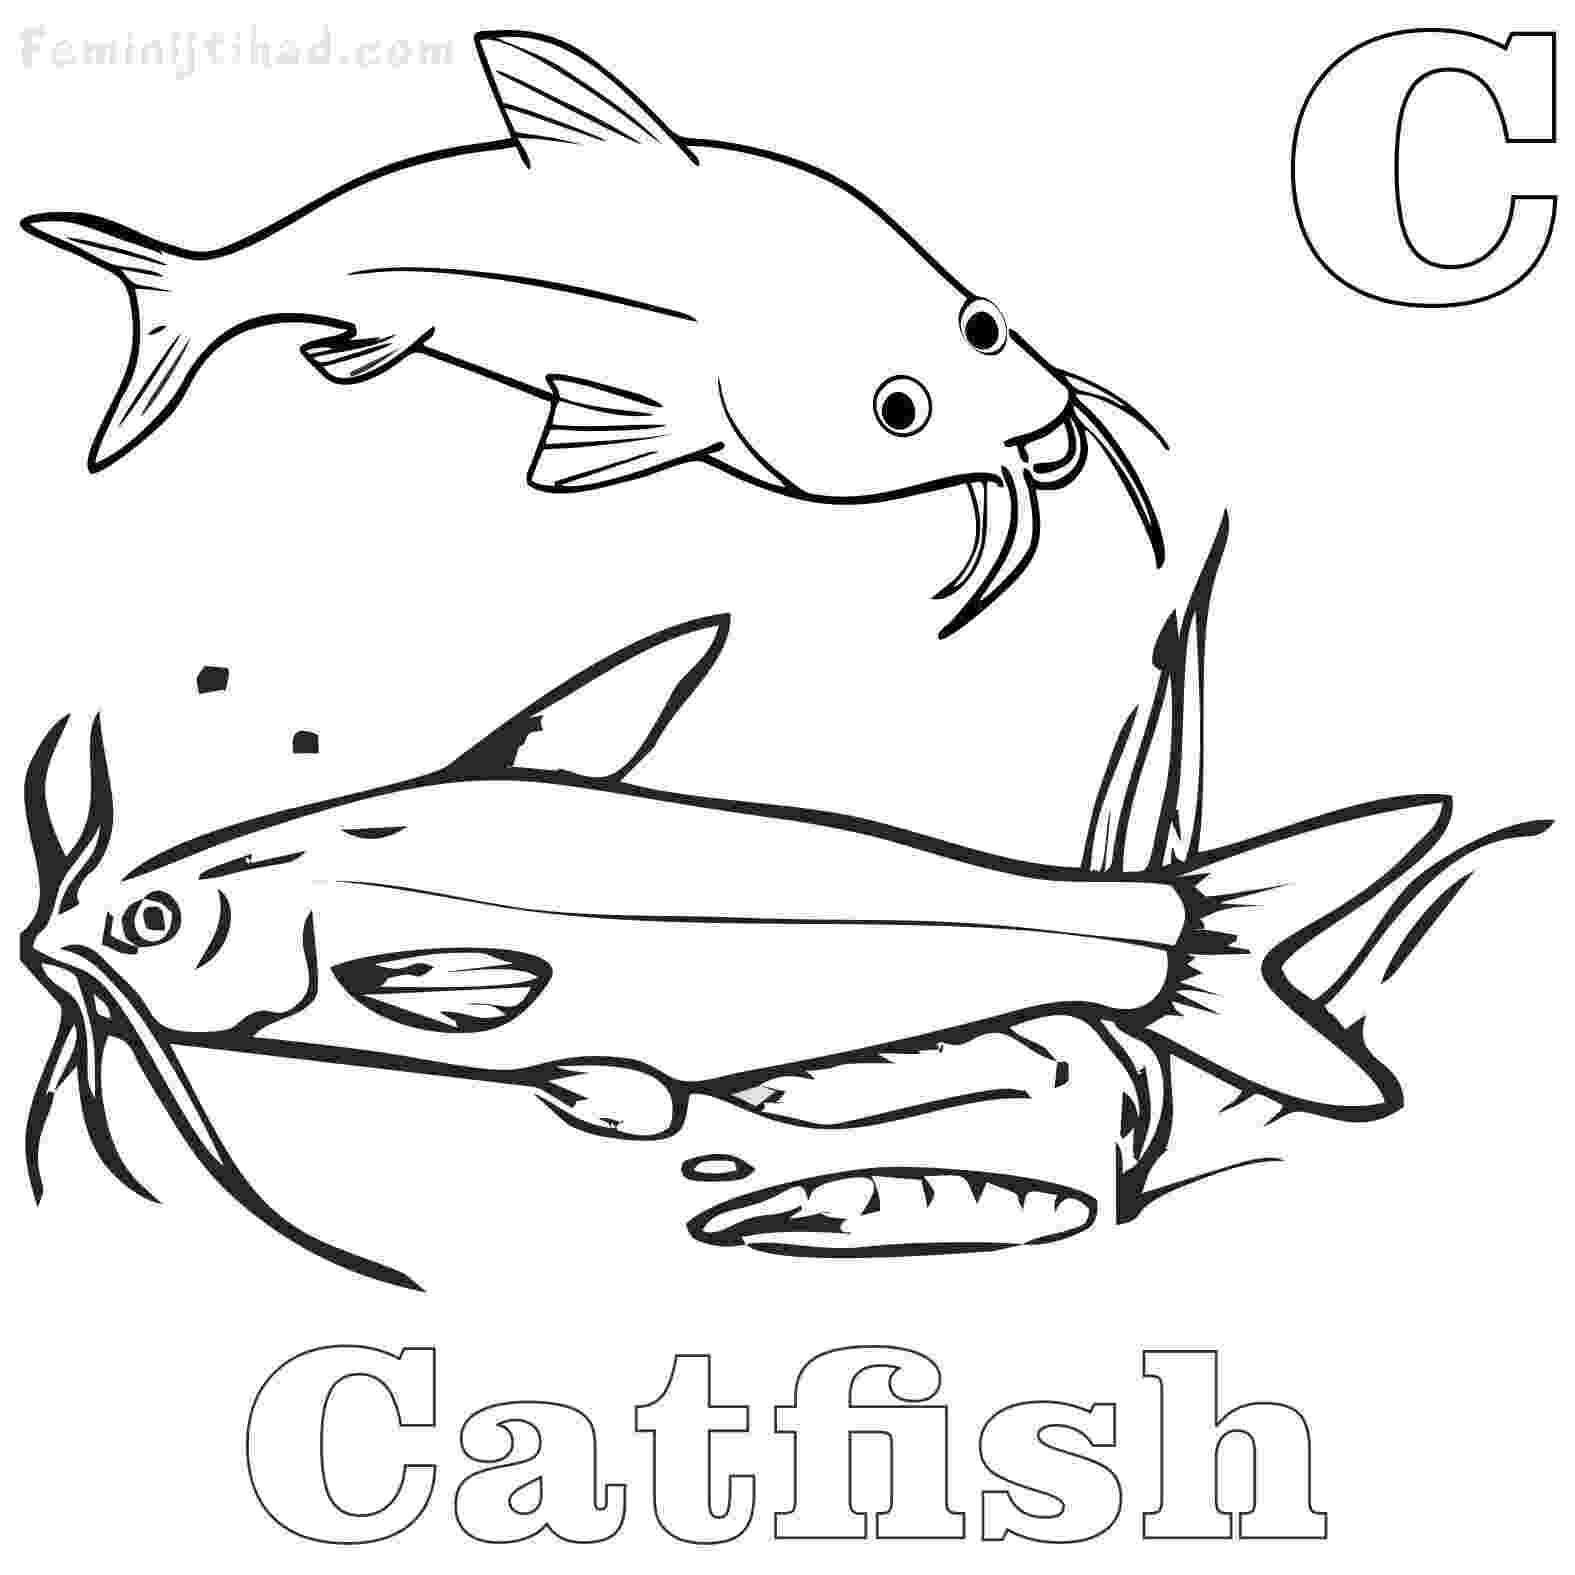 catfish coloring page catfish coloring page 1 catfish page coloring 